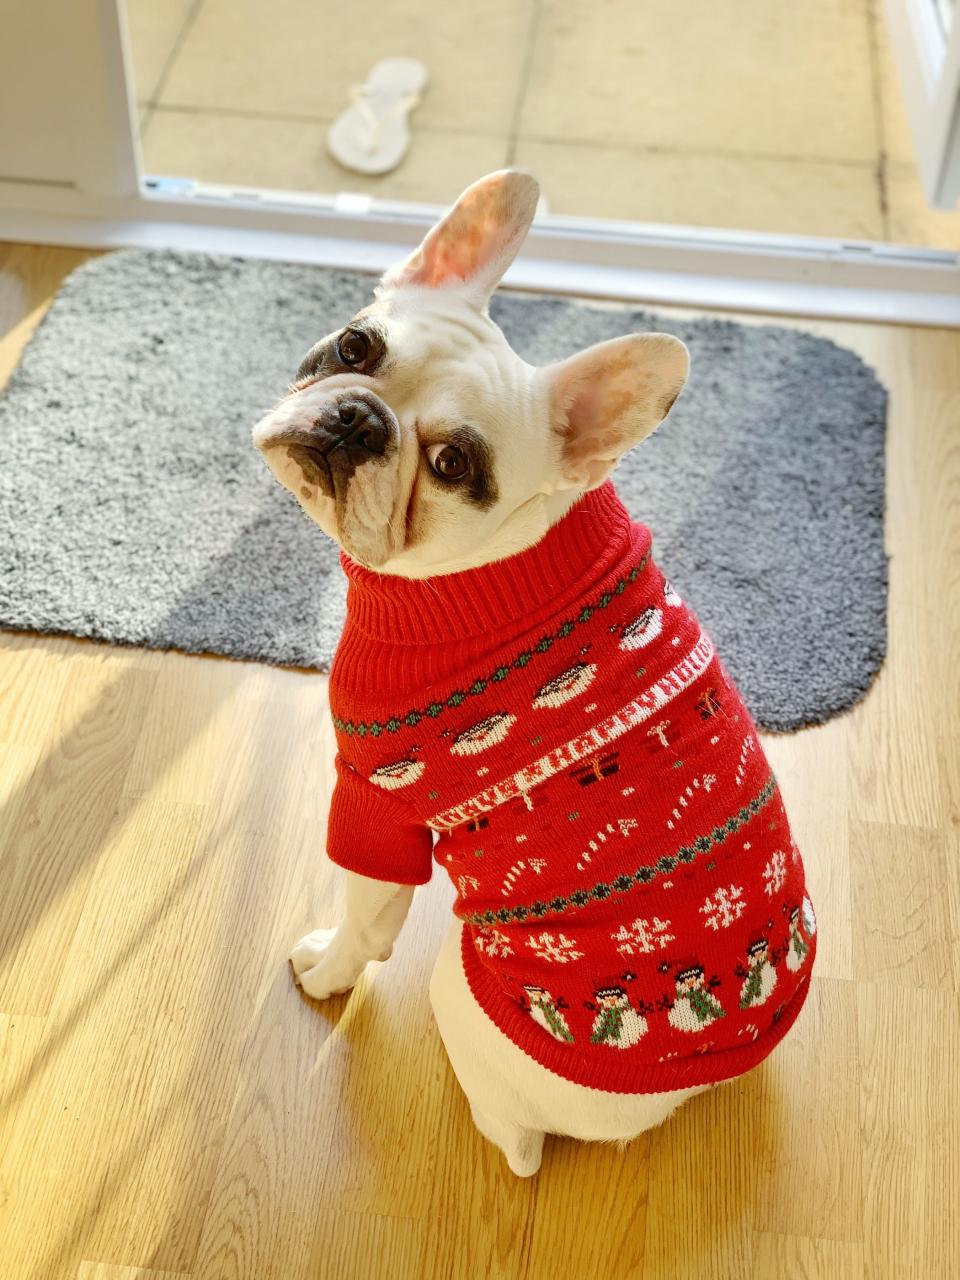 A French Bulldog puppy at Christmas. A Massachusetts family is grieving the loss of their 3-year-old French bulldog police said died in the care of a woman hired to train the dog.